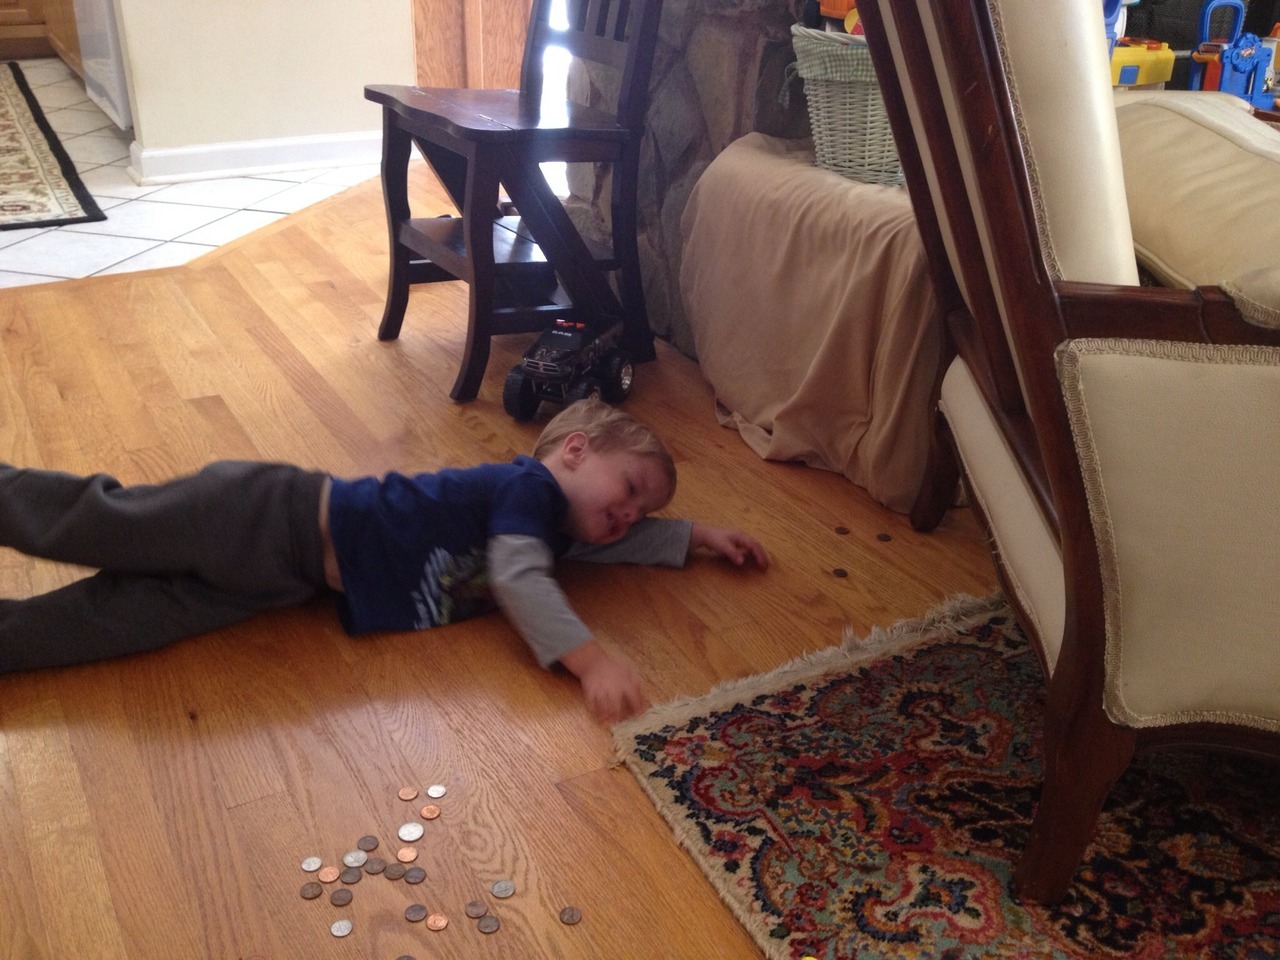 "He can’t reach the pennies. They’re too far away."Submitted By: Whitney L.Location: Kentucky, United States 